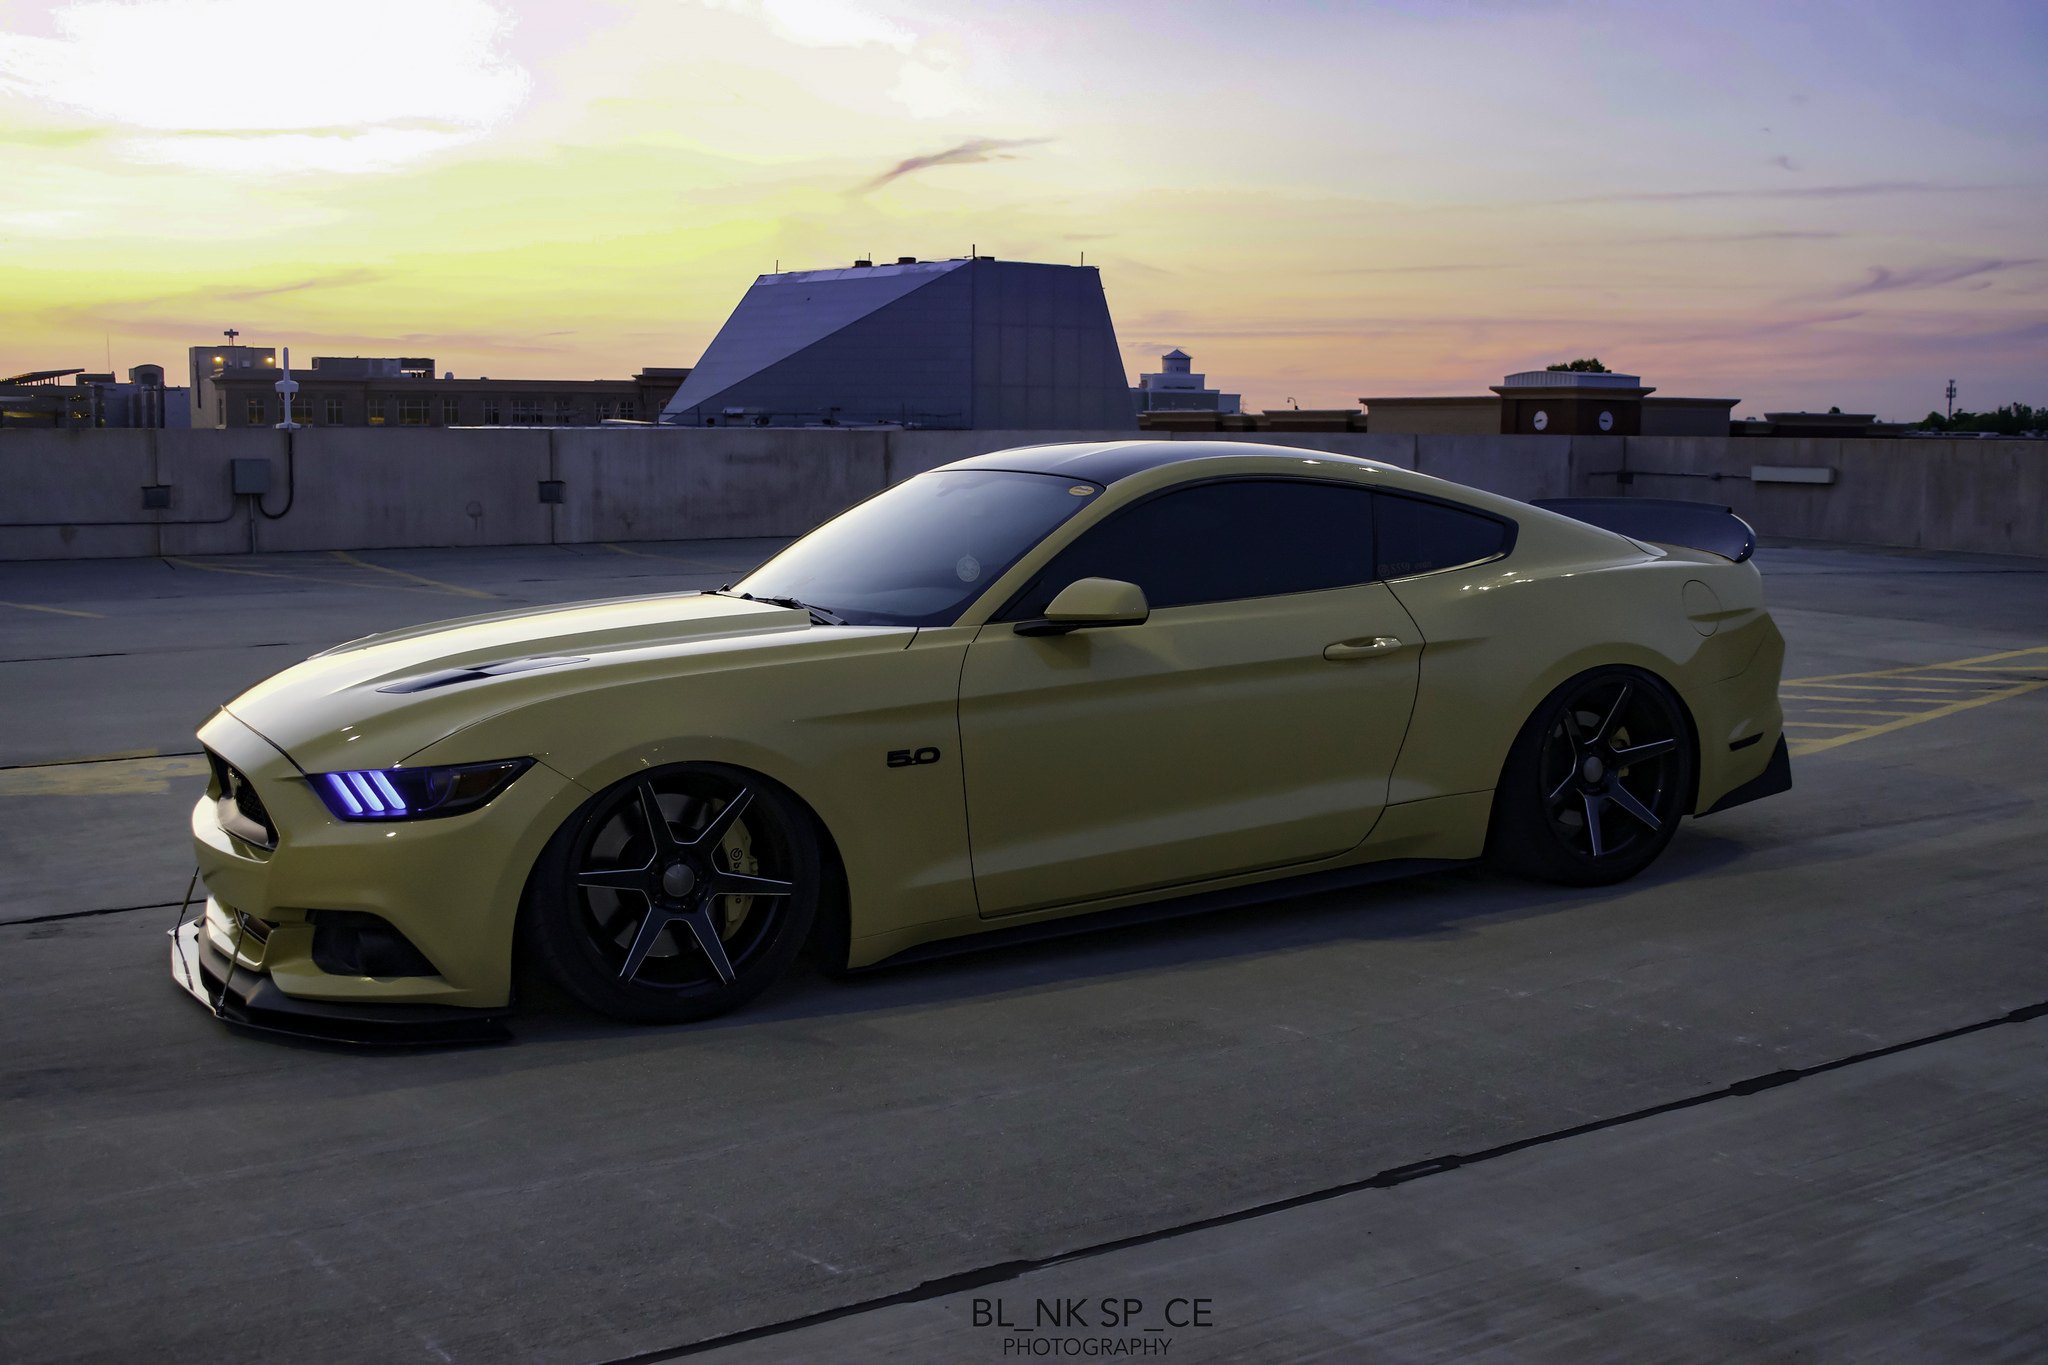 Aftermarket Side Skirts on Yellow Ford Mustang 5.0 - Photo by Ace Alloy